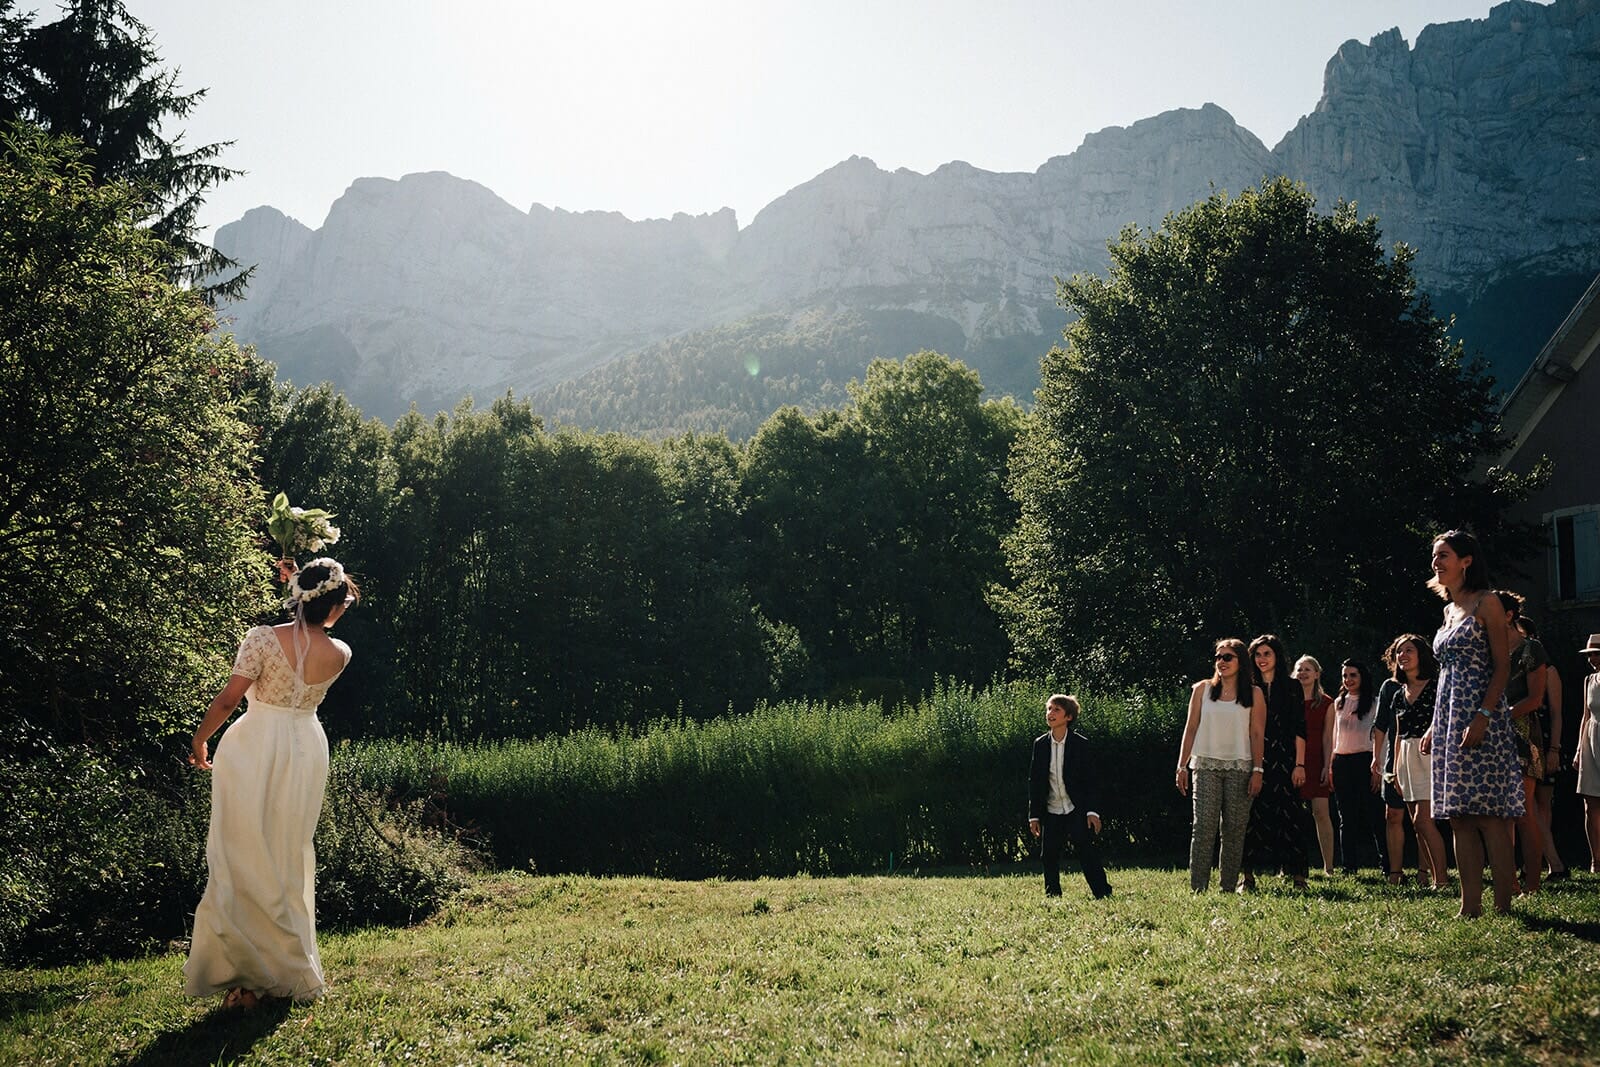  How to choose your wedding photographer 2018 2019 Best Wedding Photographer comment choisir son photographe de mariage 2018 2019 meilleur photographe de mariage meilleur photographe de mariage Lyon Photographe mariage Lyon Photographe reportage mariage Lyon